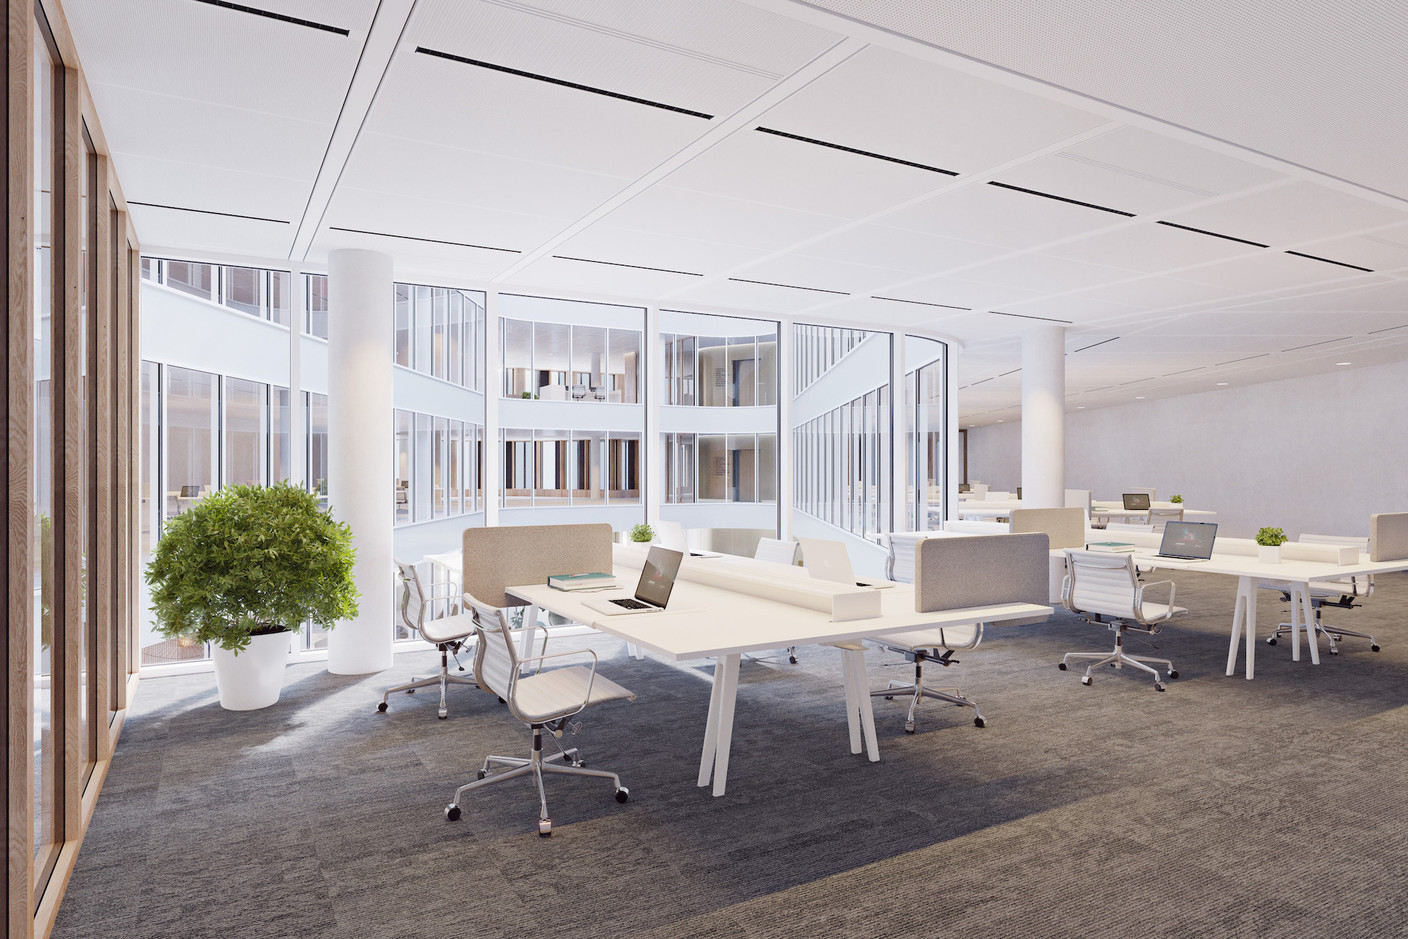 The office spaces will be flexible and adaptable to the wishes of the users. Illustrations: IKO Real Estate – Thomas & Piron